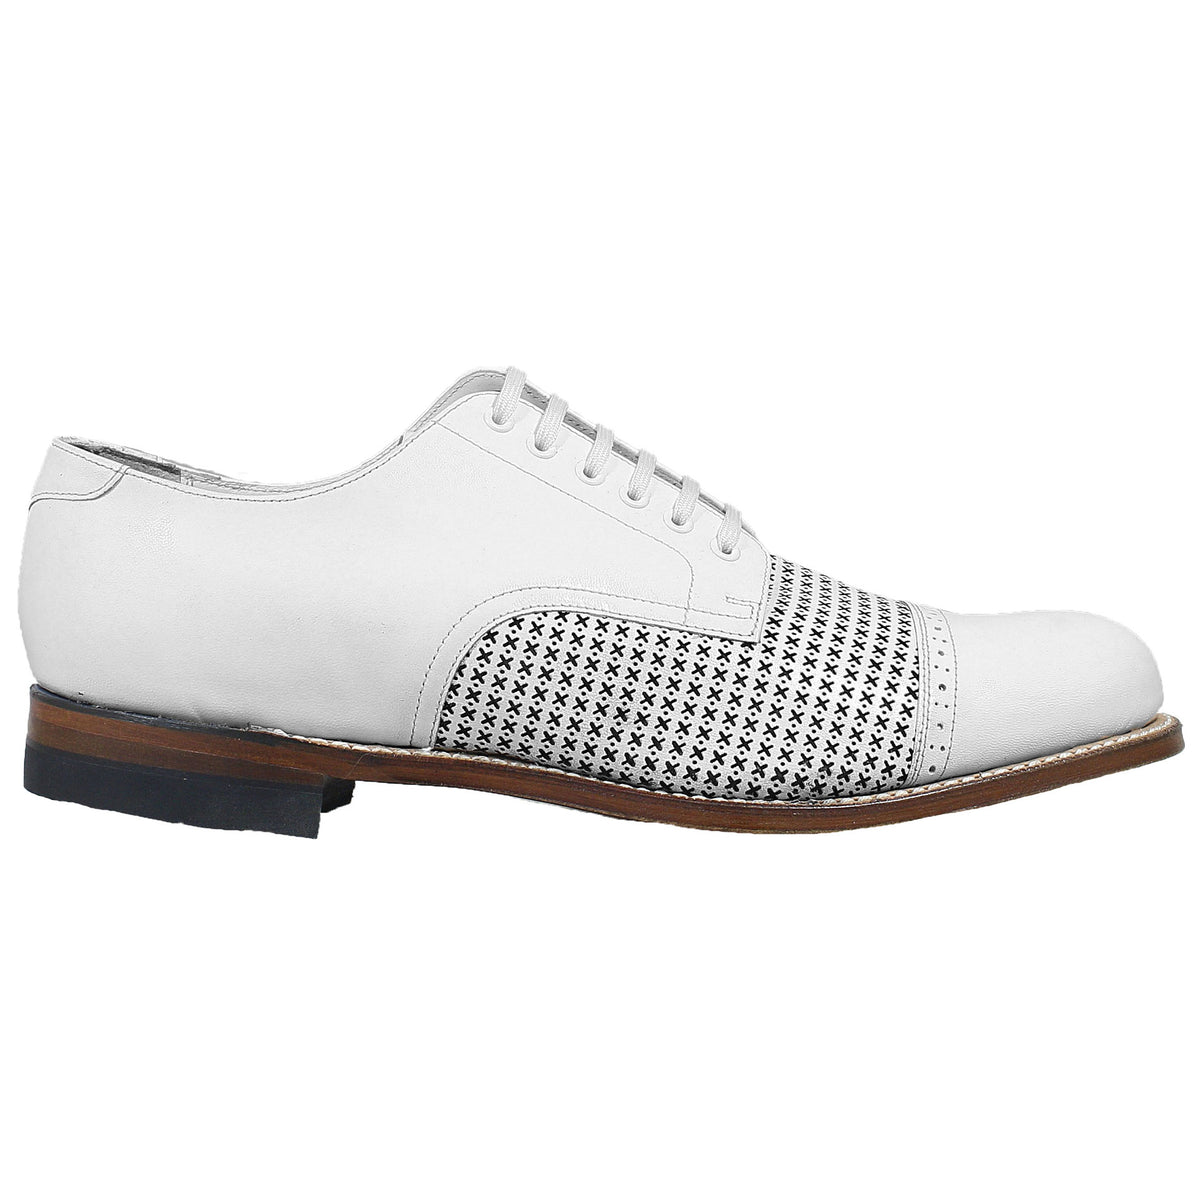 stacy adams madison dress shoes